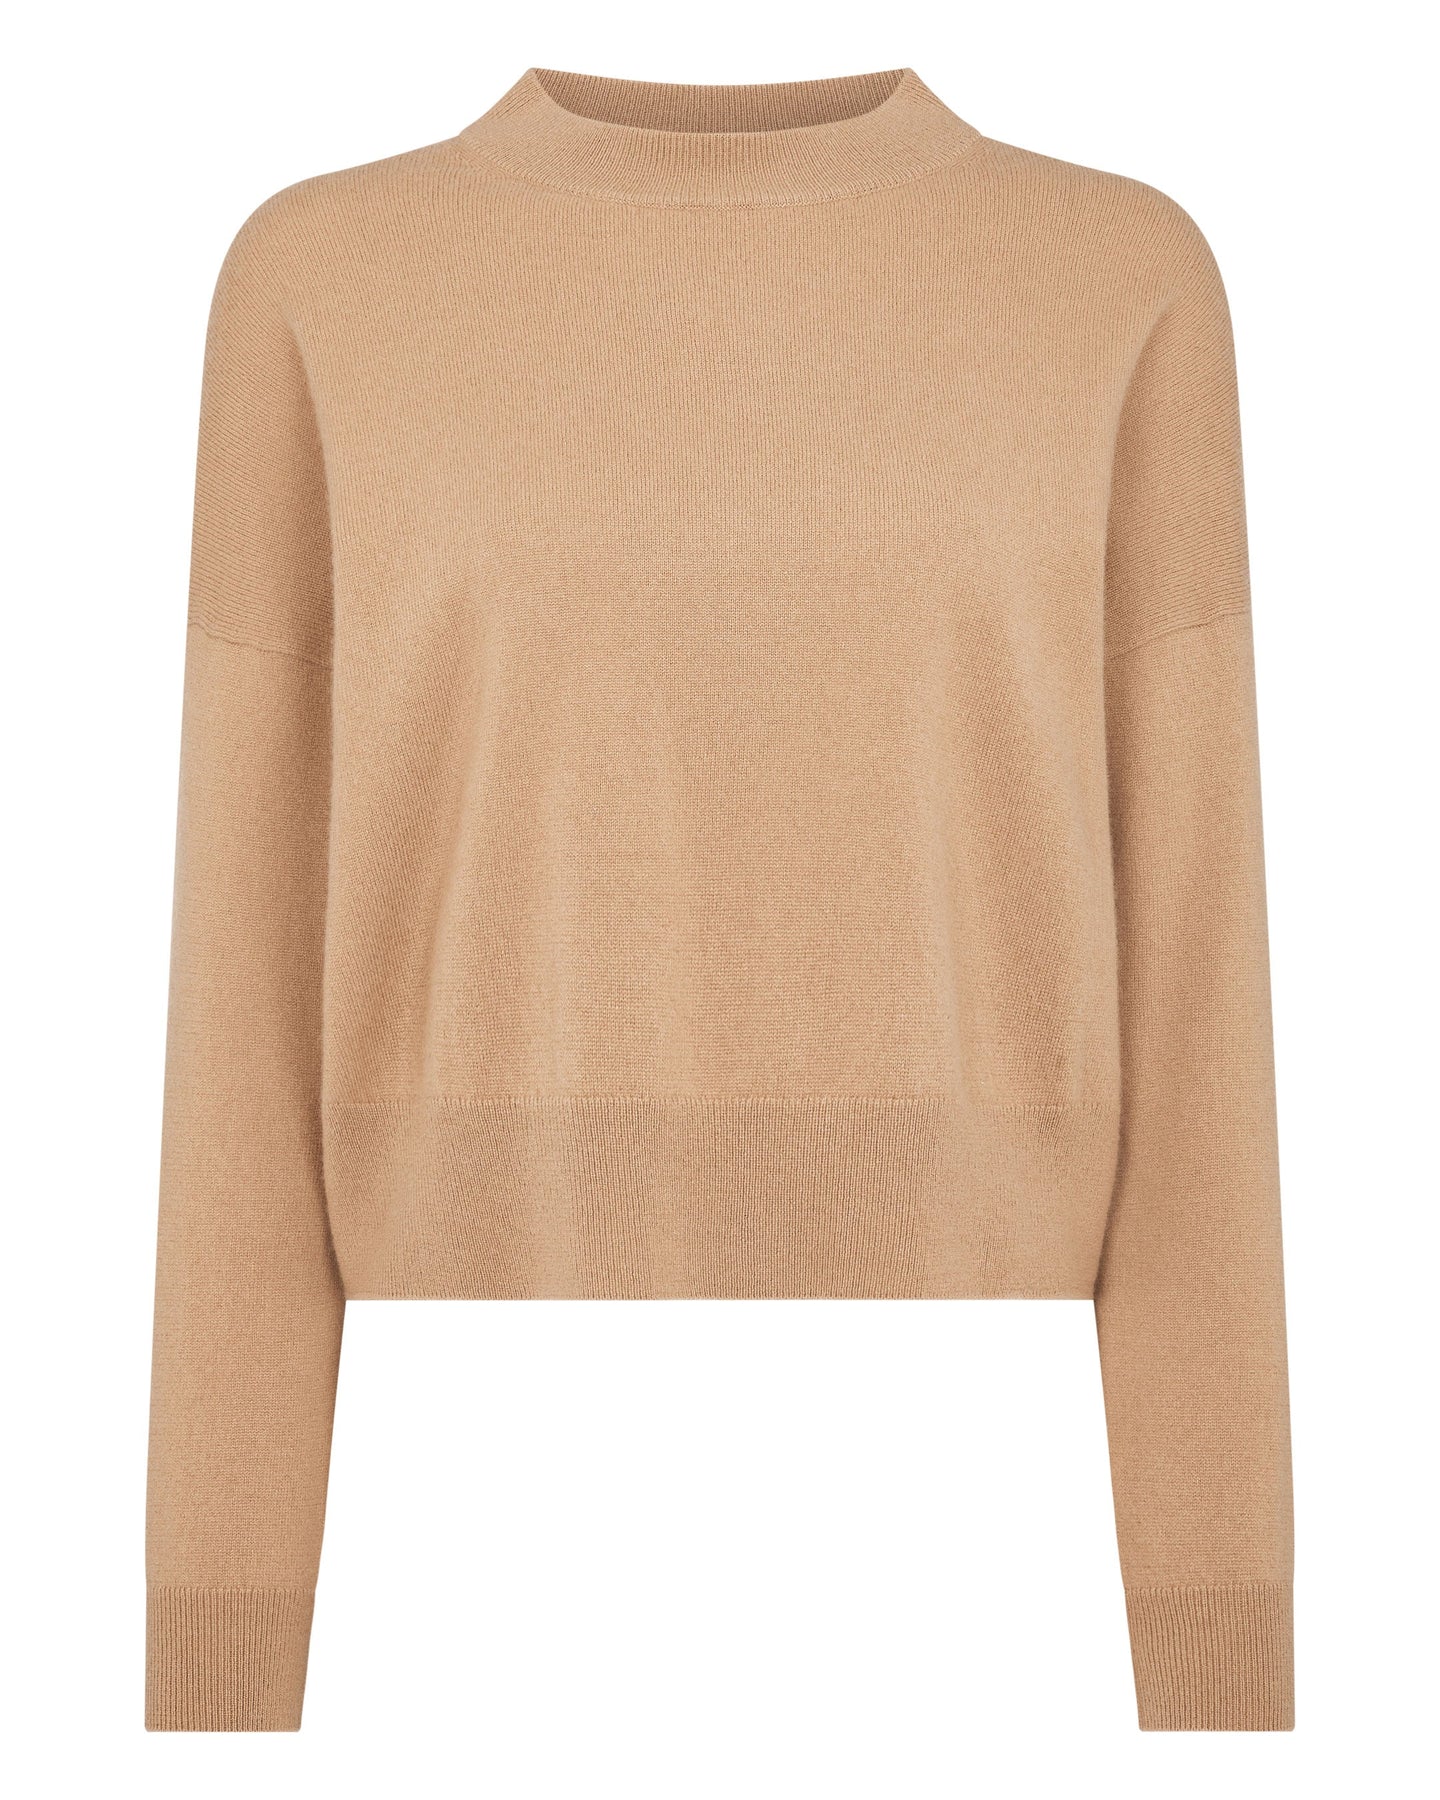 N.Peal Women's Relaxed Round Neck Cashmere Jumper Sahara Brown